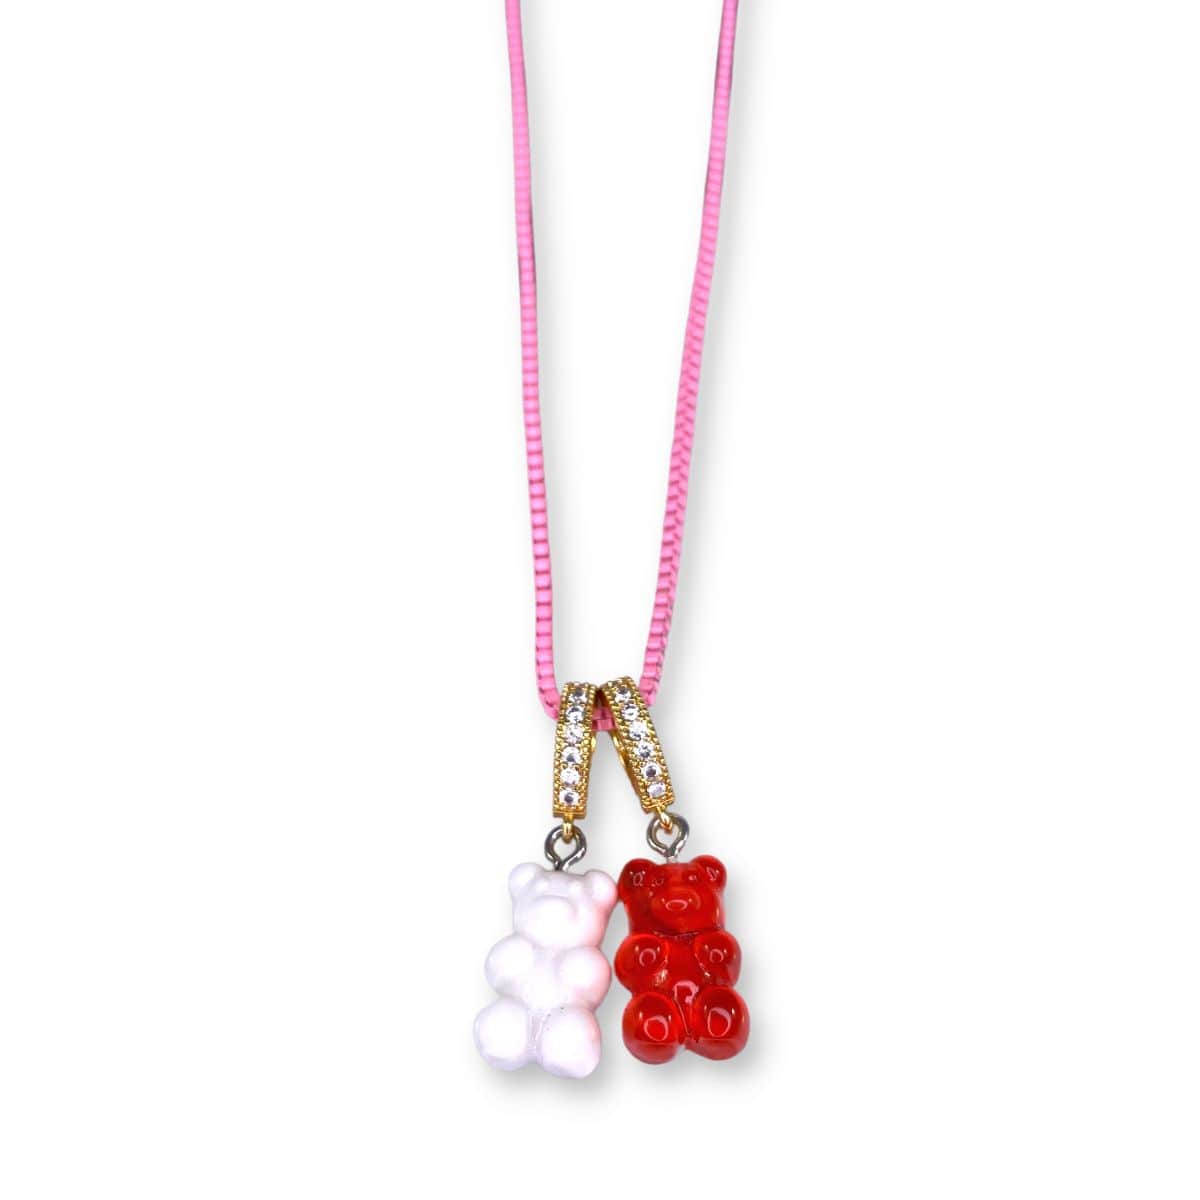 JewelersClub Candy Cane Necklace Diamond Necklaces for Women – Genuine  White Diamond, 14k Gold over Silver Necklace Candy Cane – Christmas Gifts  for Women – Silver Diamond Pendant Necklace for Women - Walmart.com